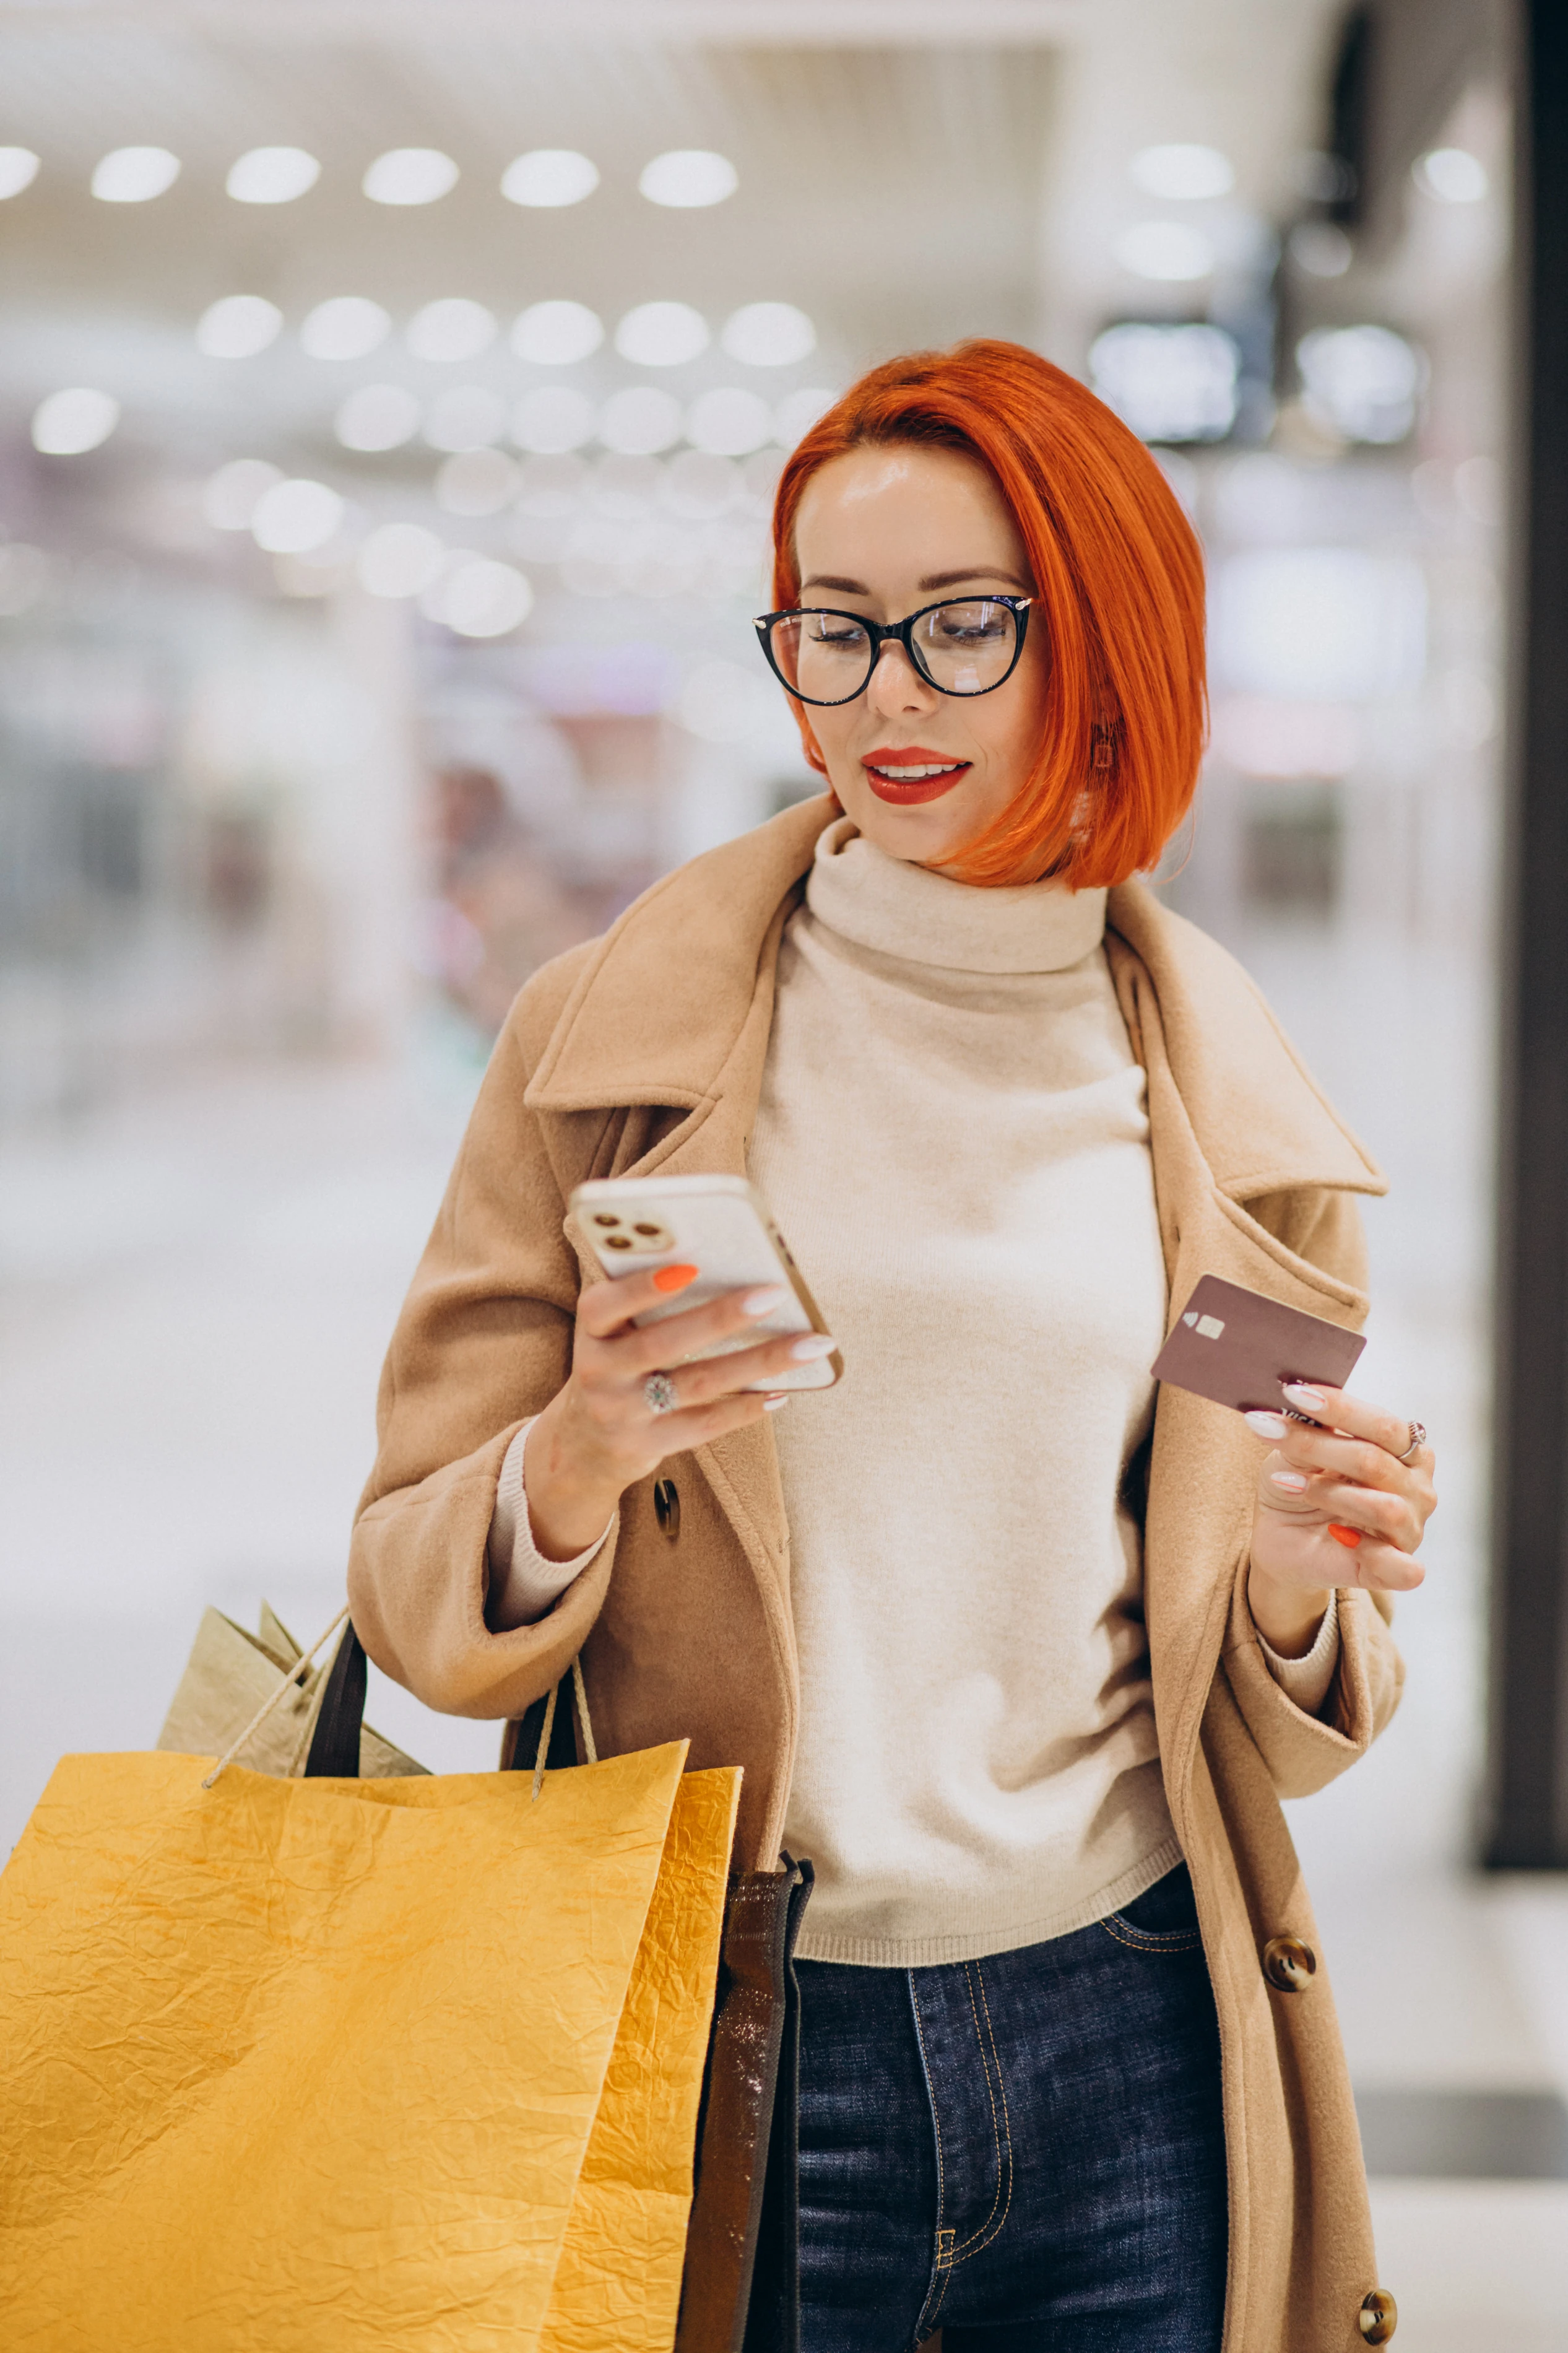 Digitalize Customer experience measurement and mystery shopping